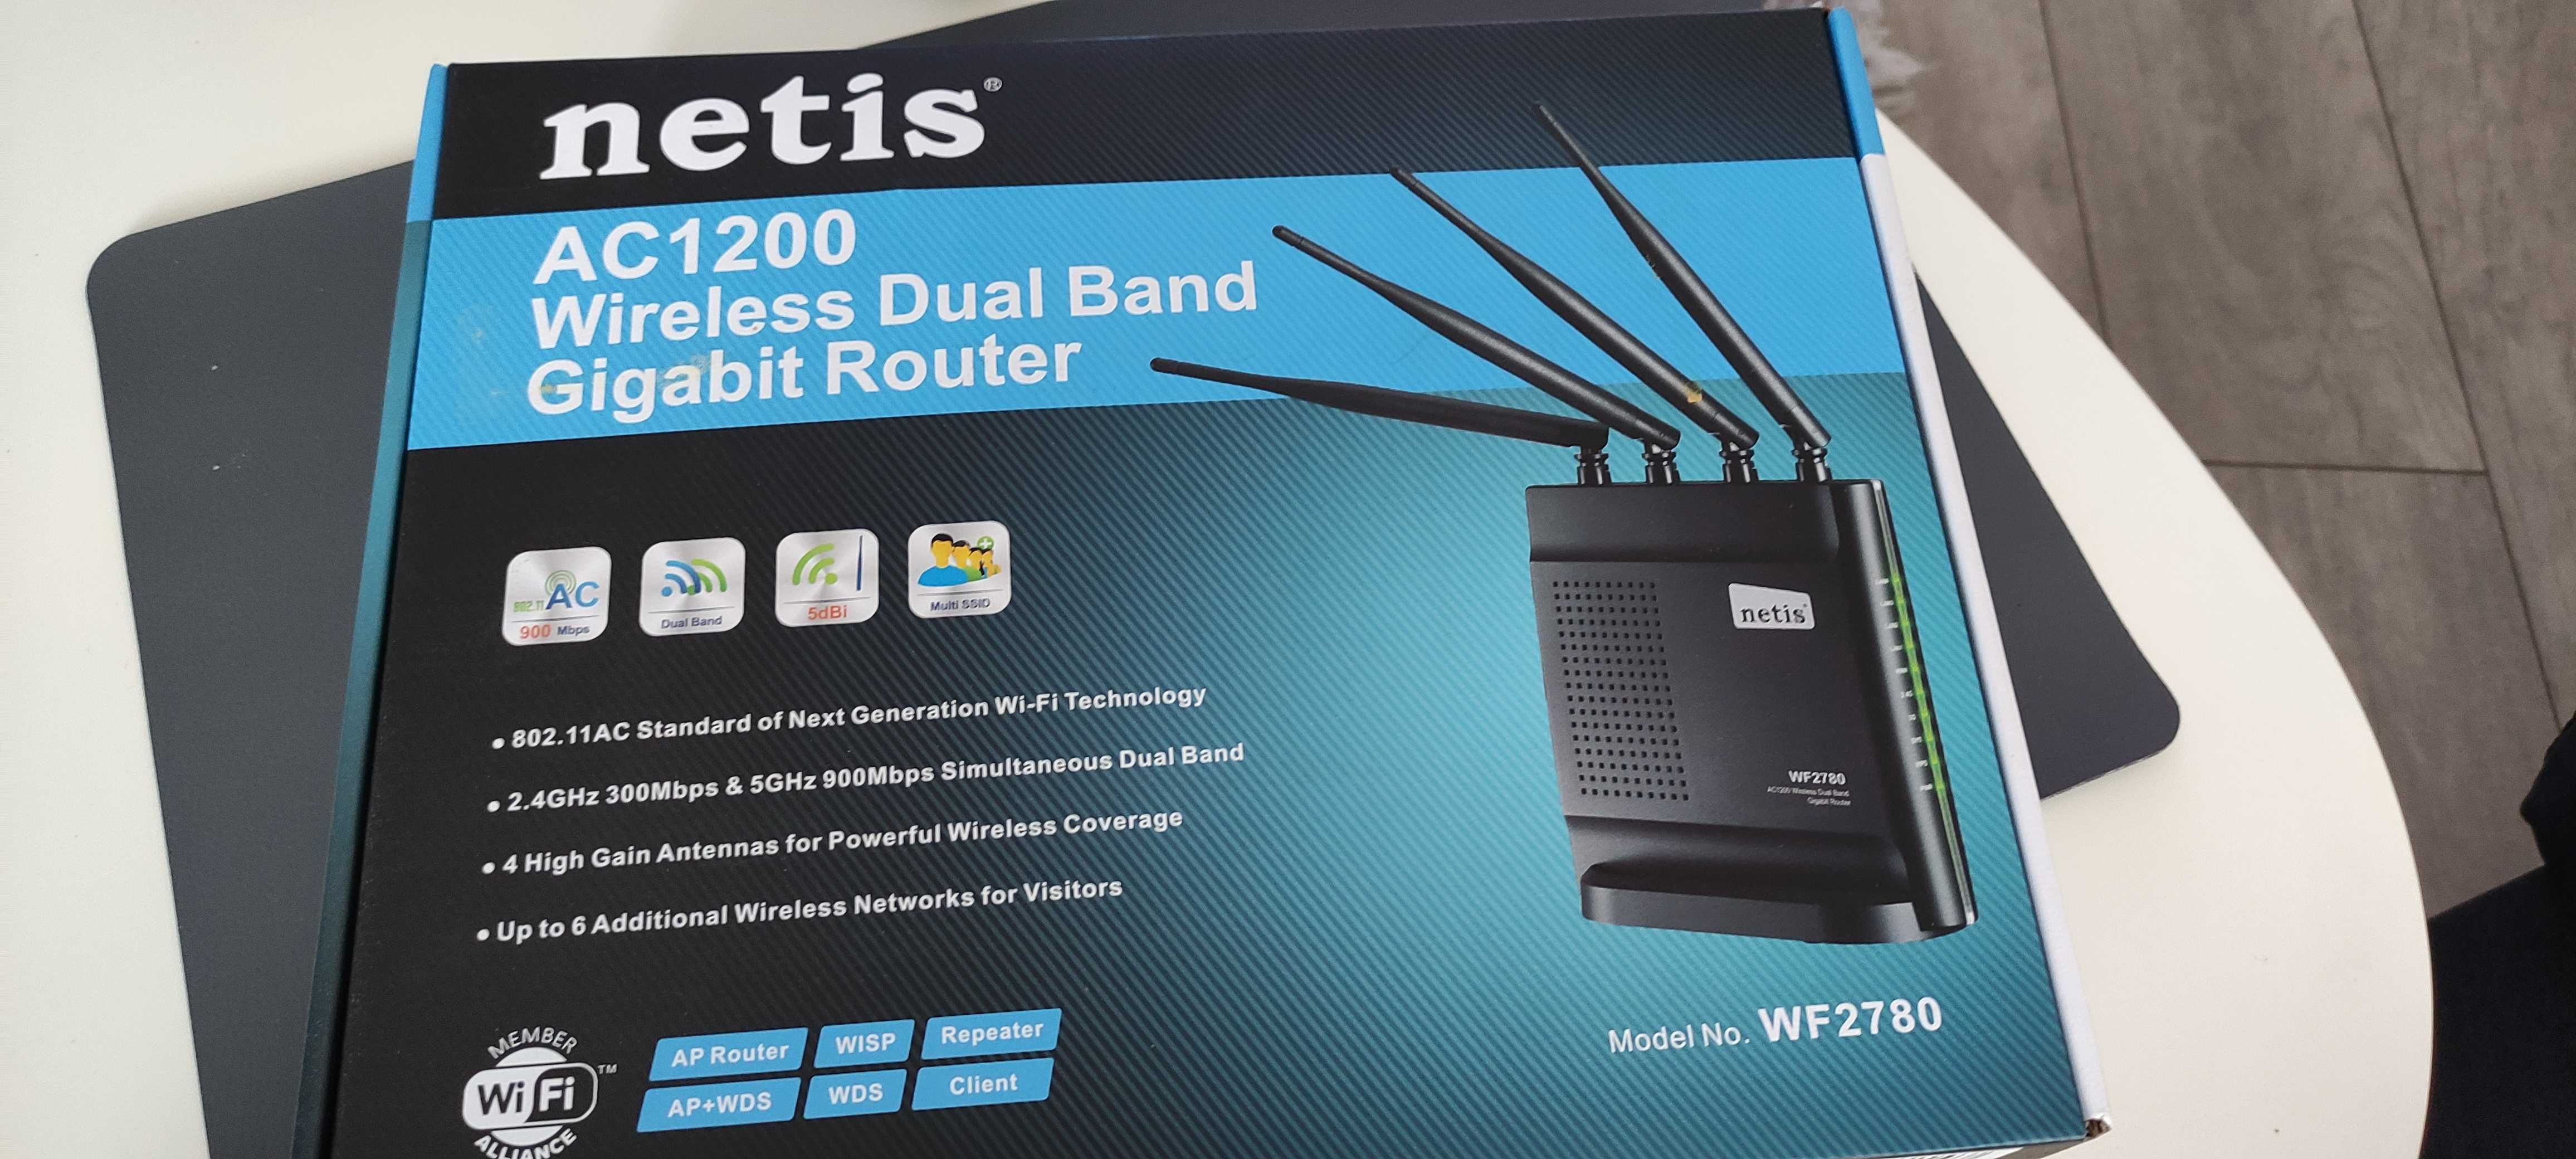 Vand router Netis !!!